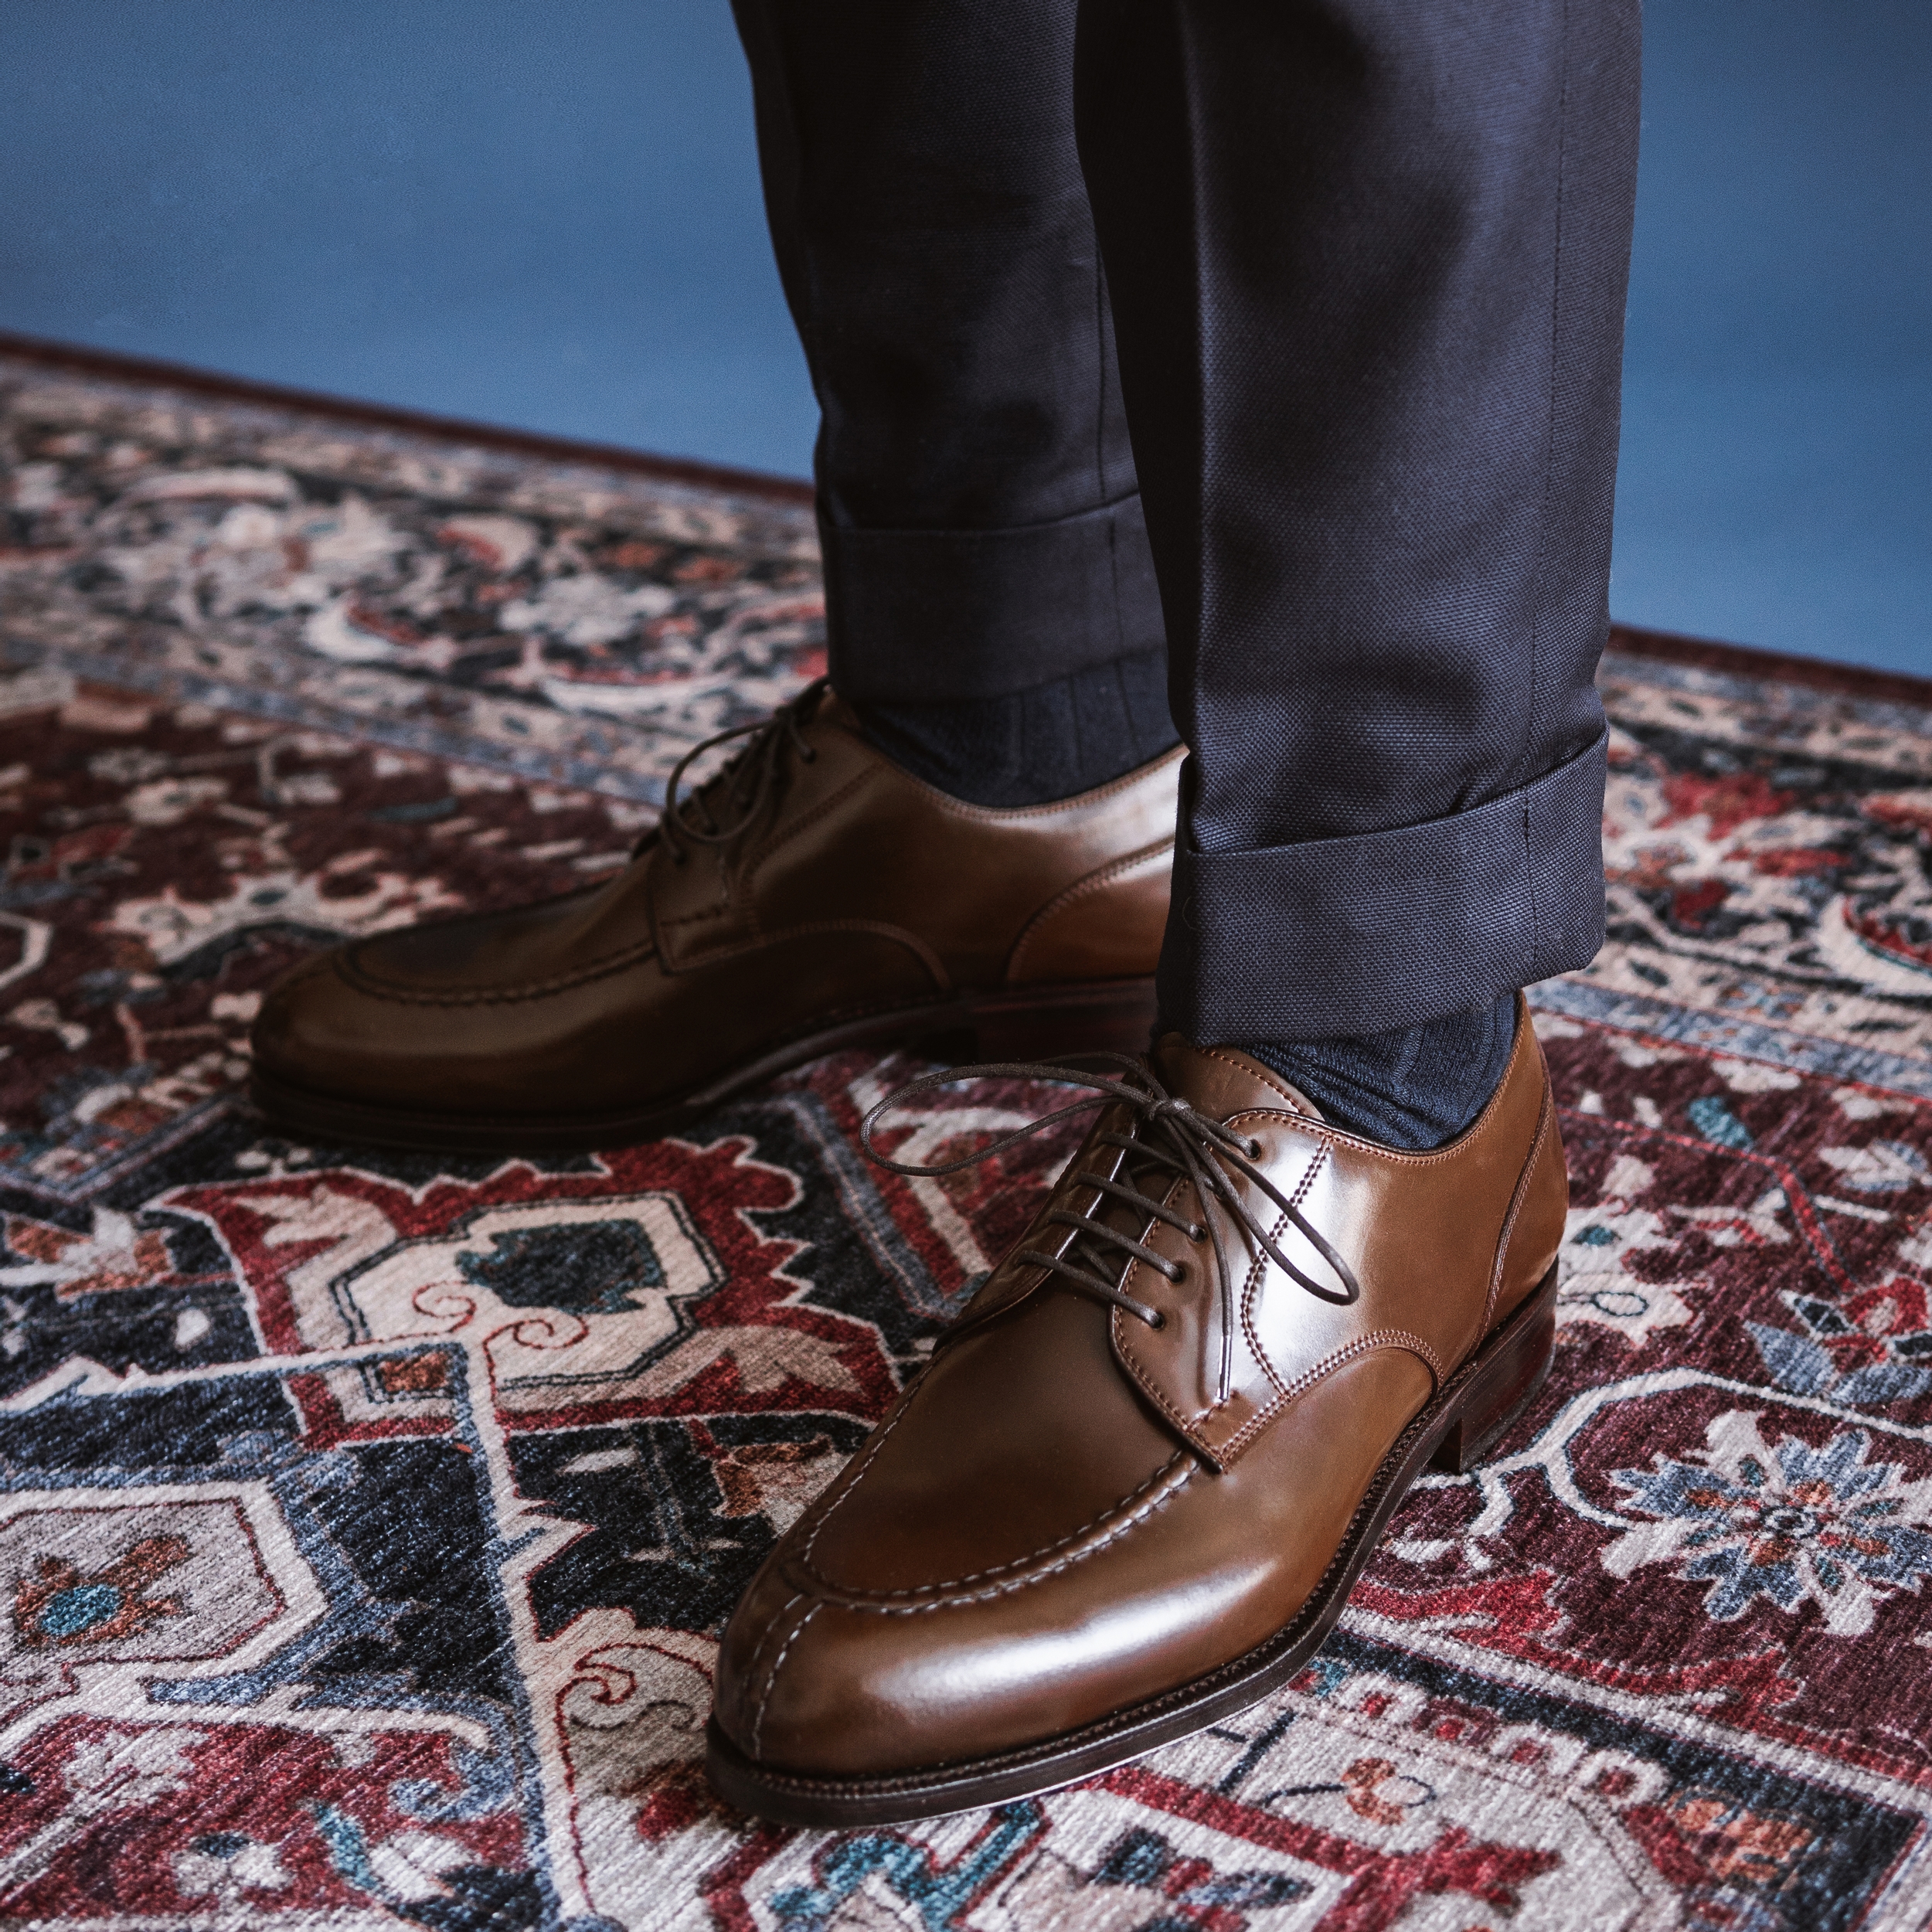 Carmina Shoemaker on Twitter: wearing his armagnac shell cordovan norwegians this year. Would you for look A or B? ​ ​​#carmina #カルミナ #menstyle #goodyearwelted #carminashoemaker #mensfashion #mensfashion #dapper #cordovan https://t.co